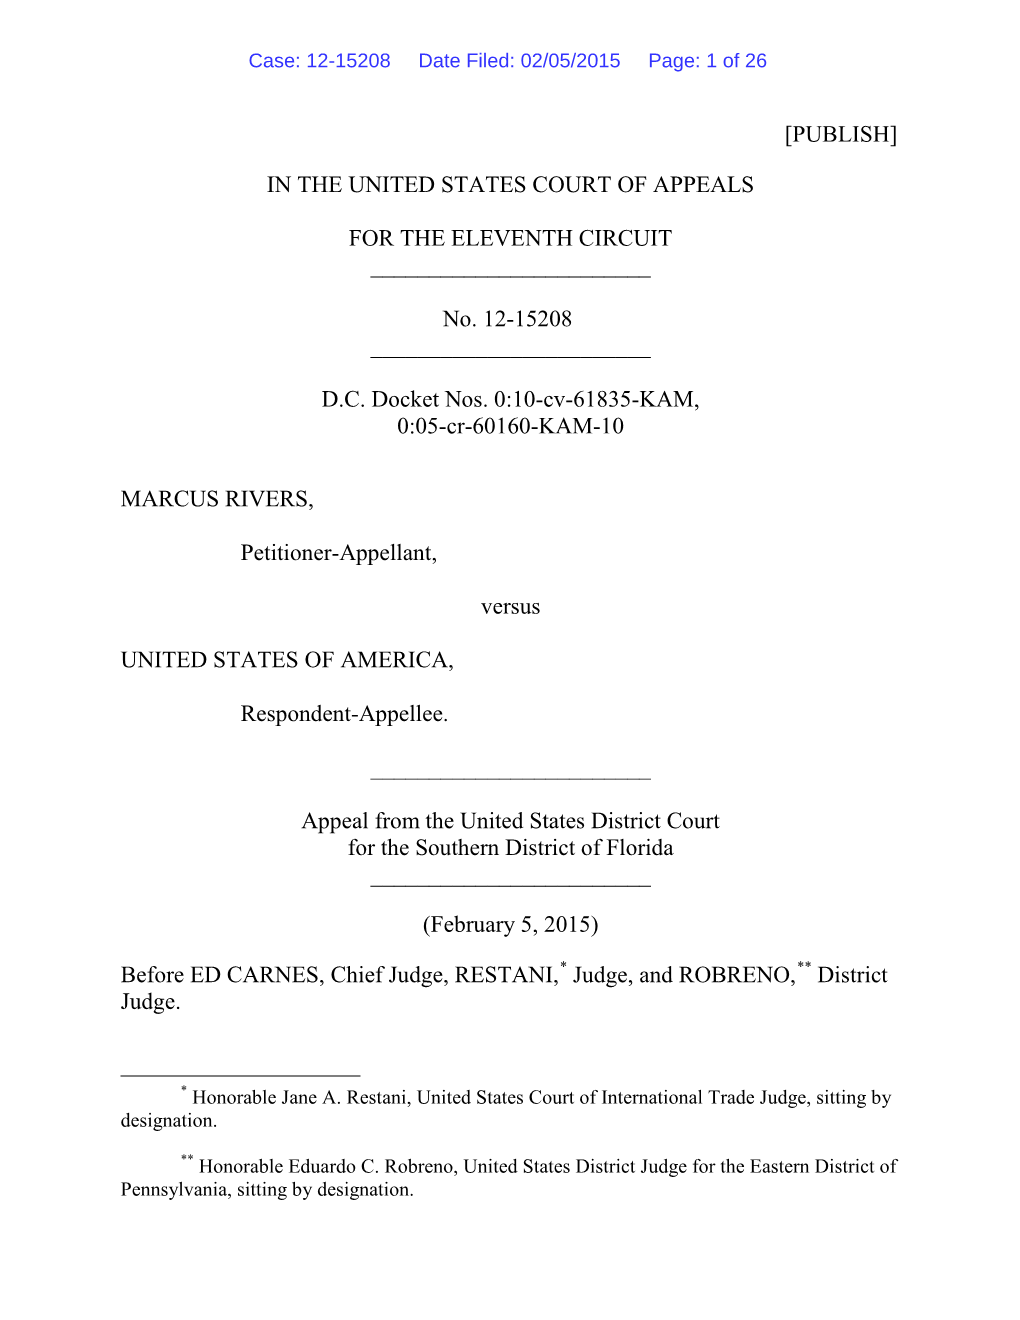 [Publish] in the United States Court of Appeals for the Eleventh